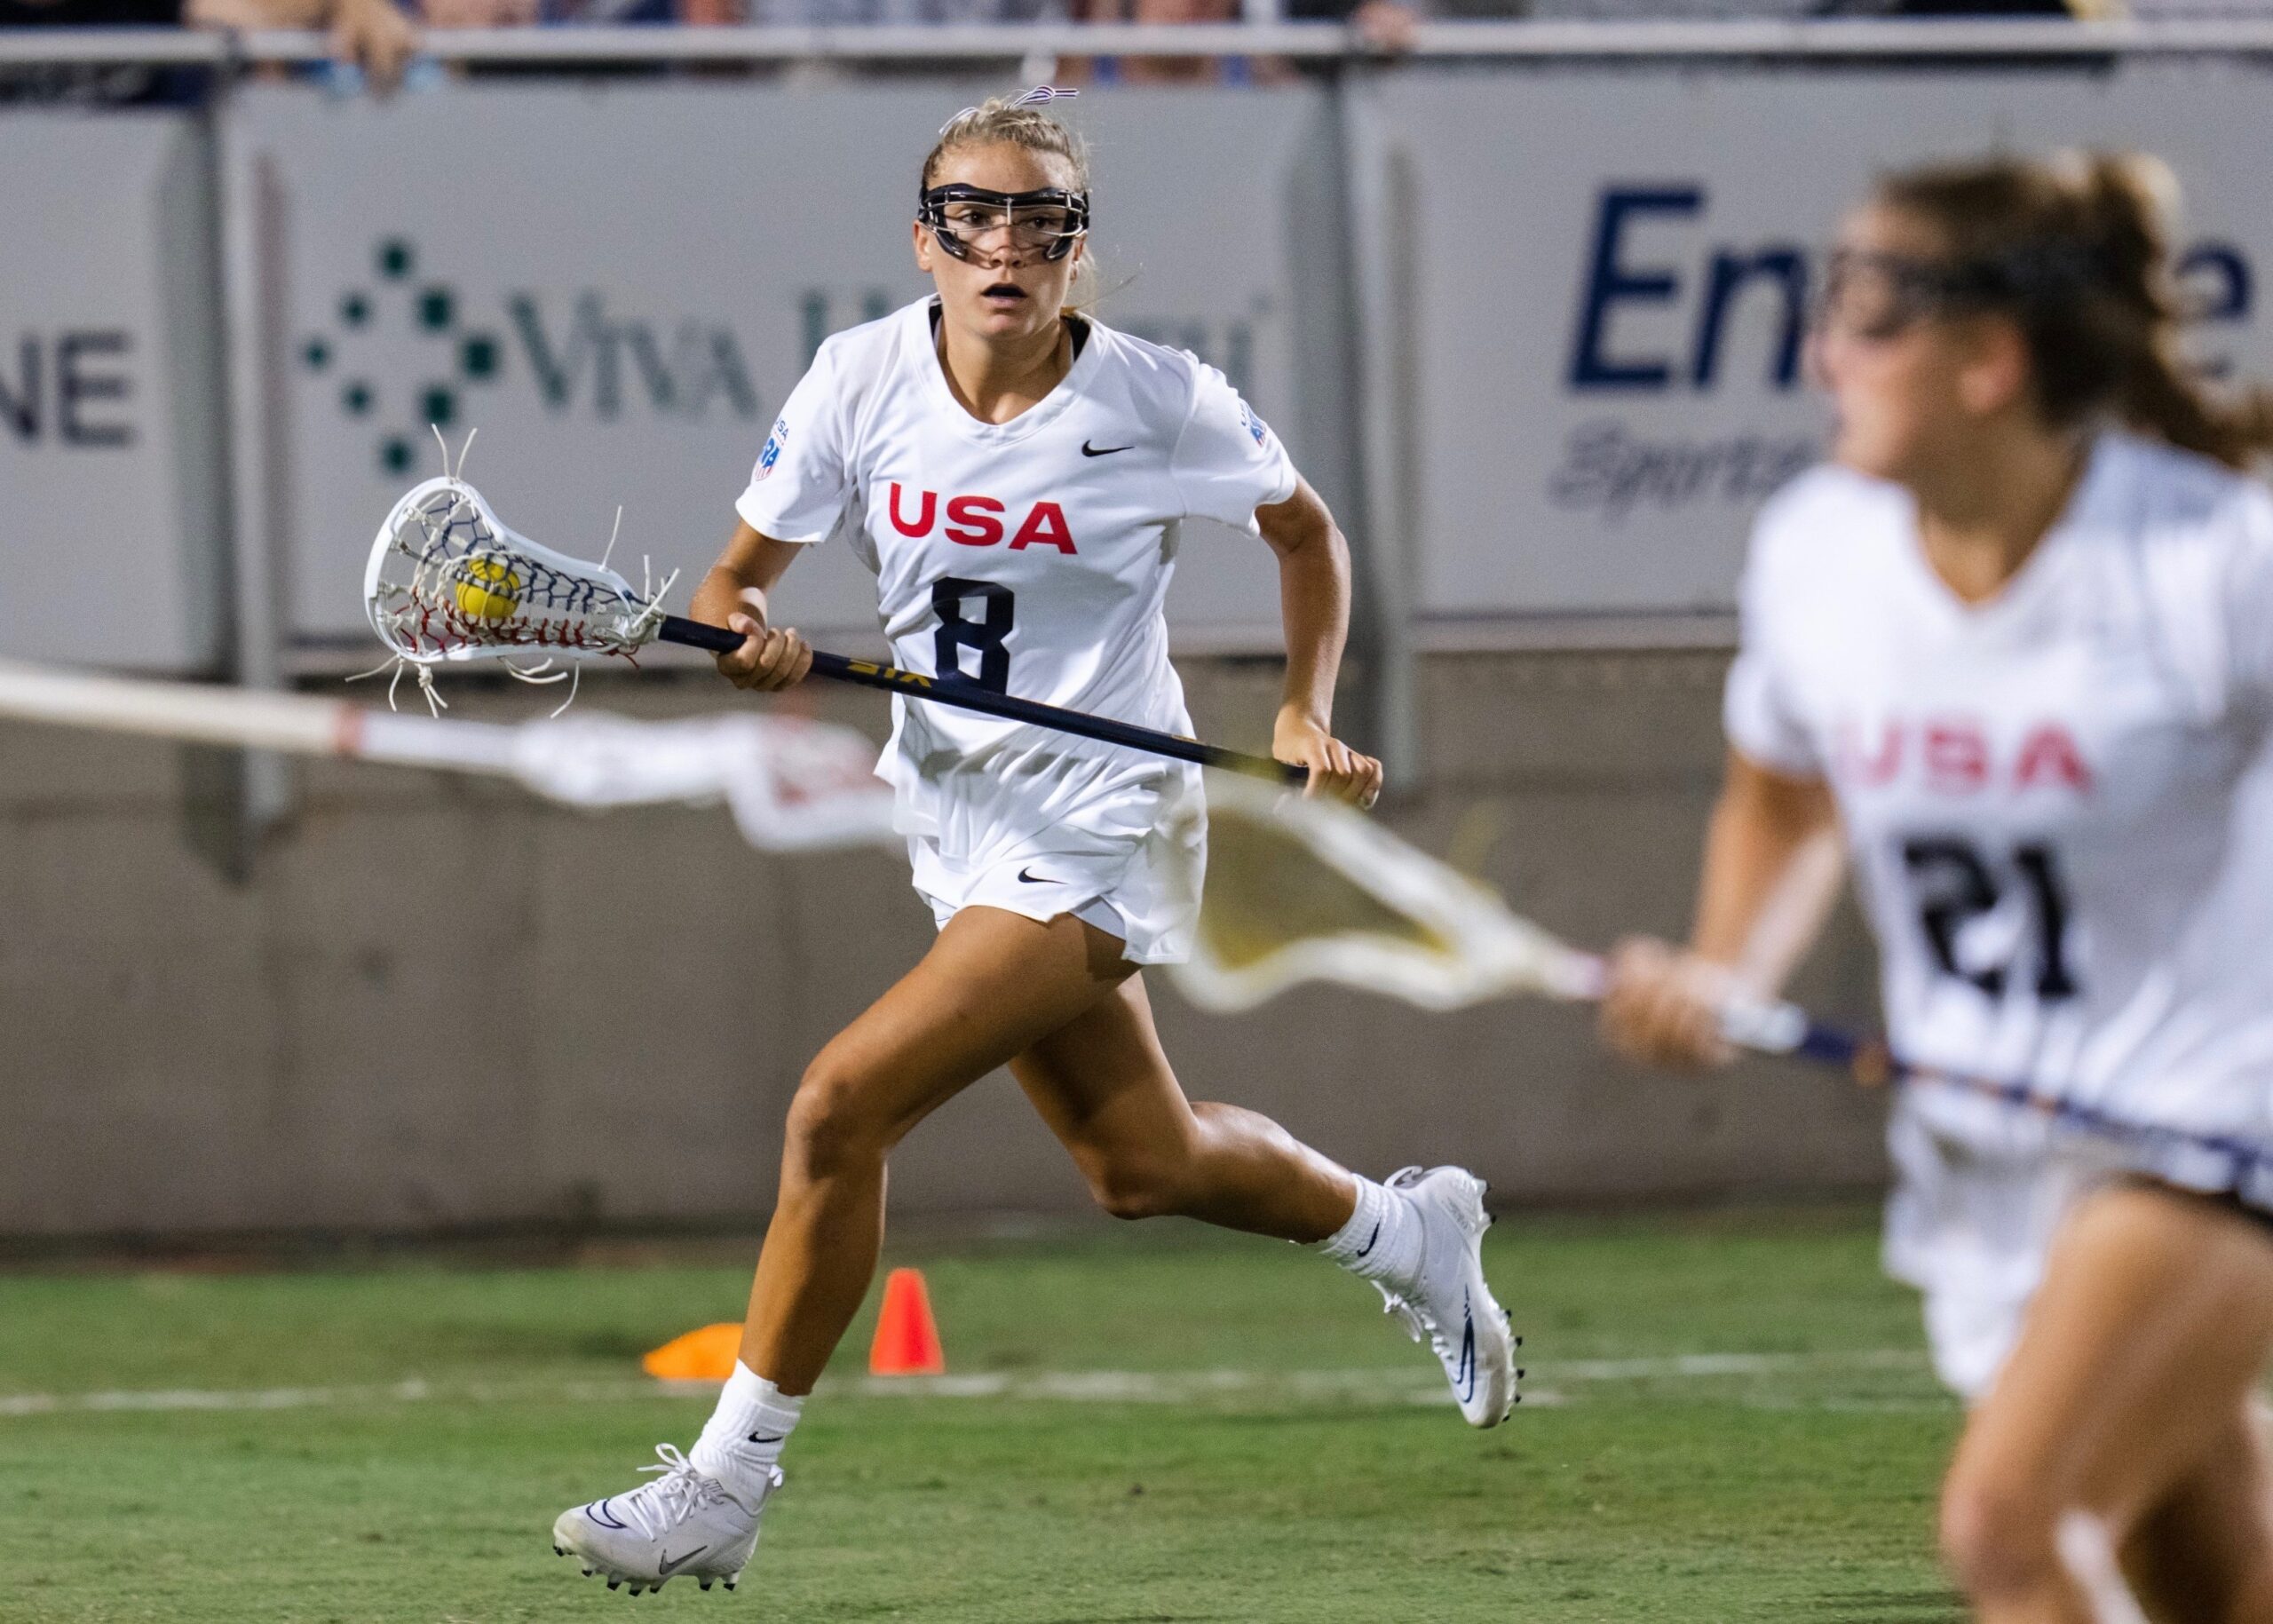 Boston College rising junior and former Westhampton Beach standout Belle Smith competed for the United States women’s Super Sixes team, which earned a silver medal. USA LACROSSE